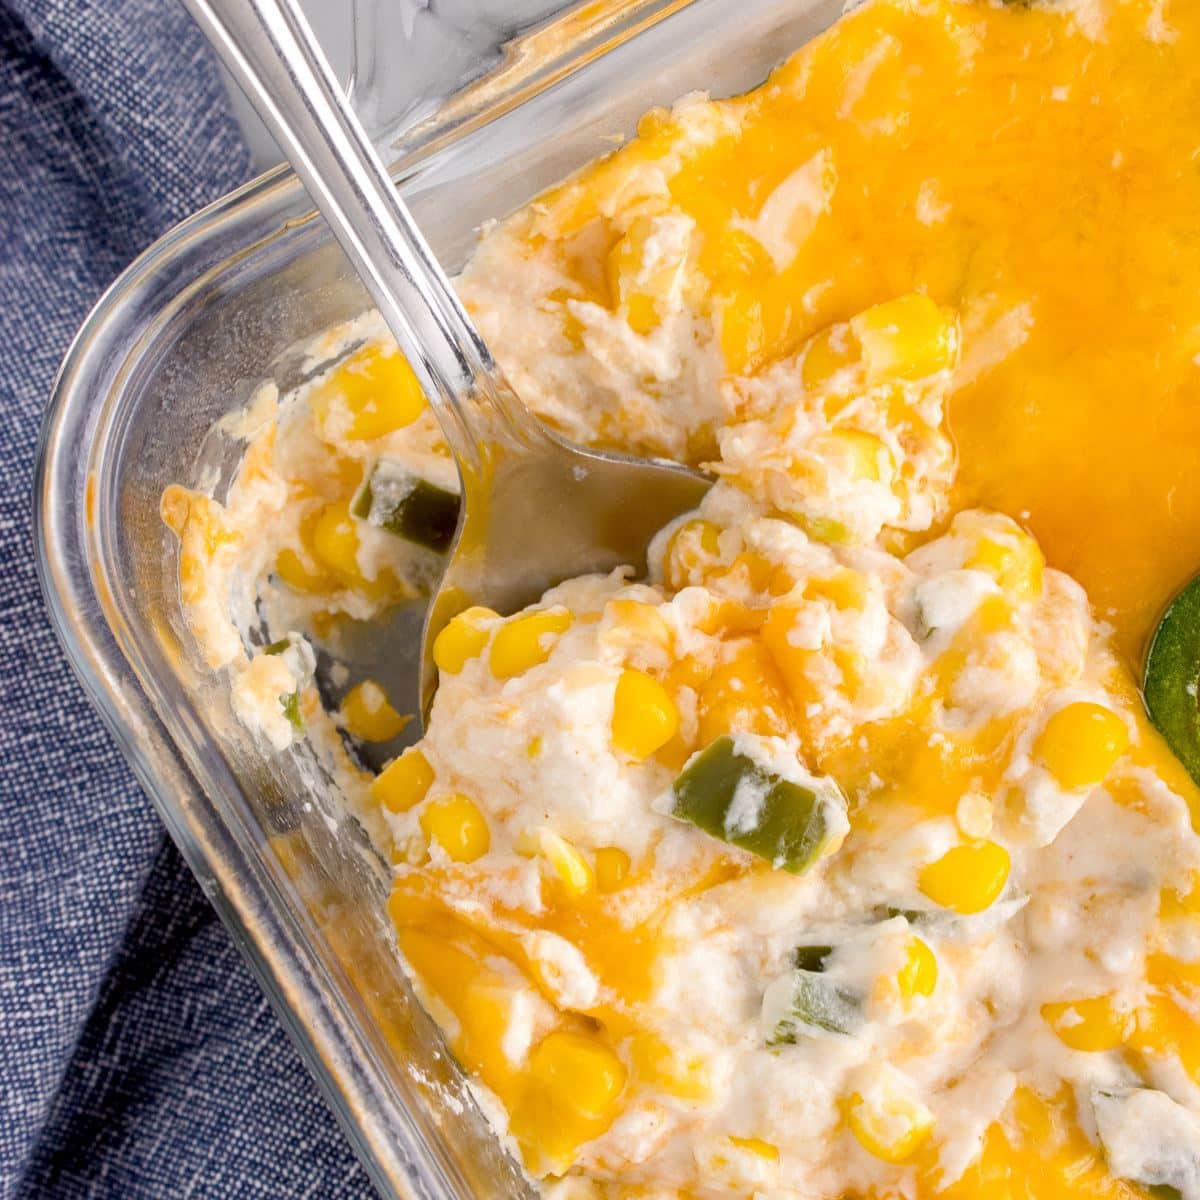 Jalapeno corn casserole in dish with spoon lifting a creamy cheesy bite.